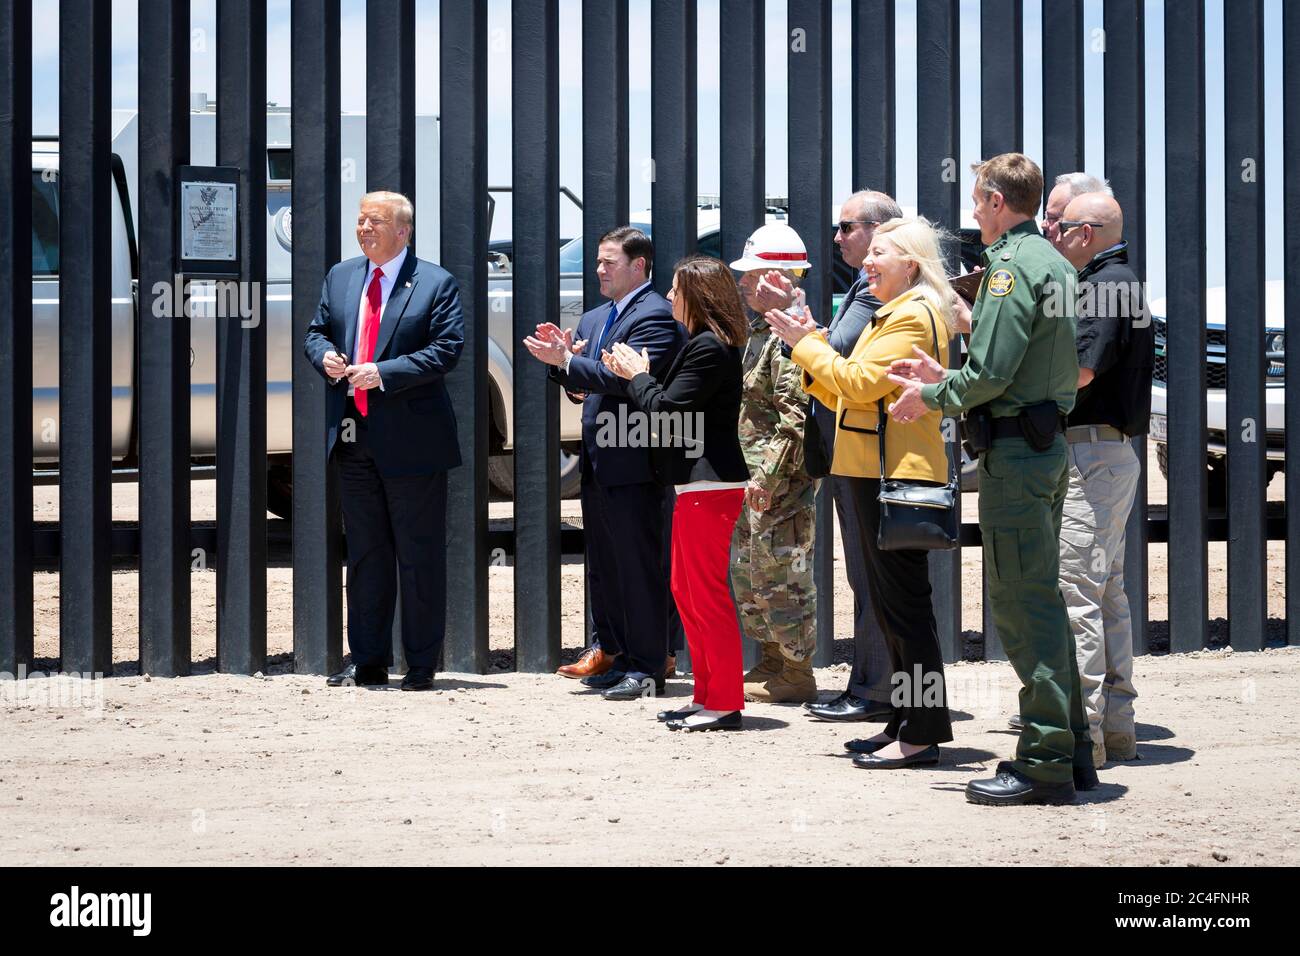 U.S. President Donald Trump along with Acting DHS Secretary Chad Wolf and Acting CBP Commissioner Mark Morgan, applaud after placing a plaque on a new section of border wall along the Mexican-American border June 23, 2020 in San Luis, Arizona. The visit marked the completion of 200 miles of border wall, the majority of which is replacement for existing structure at a cost of $20-million dollars a mile. Stock Photo